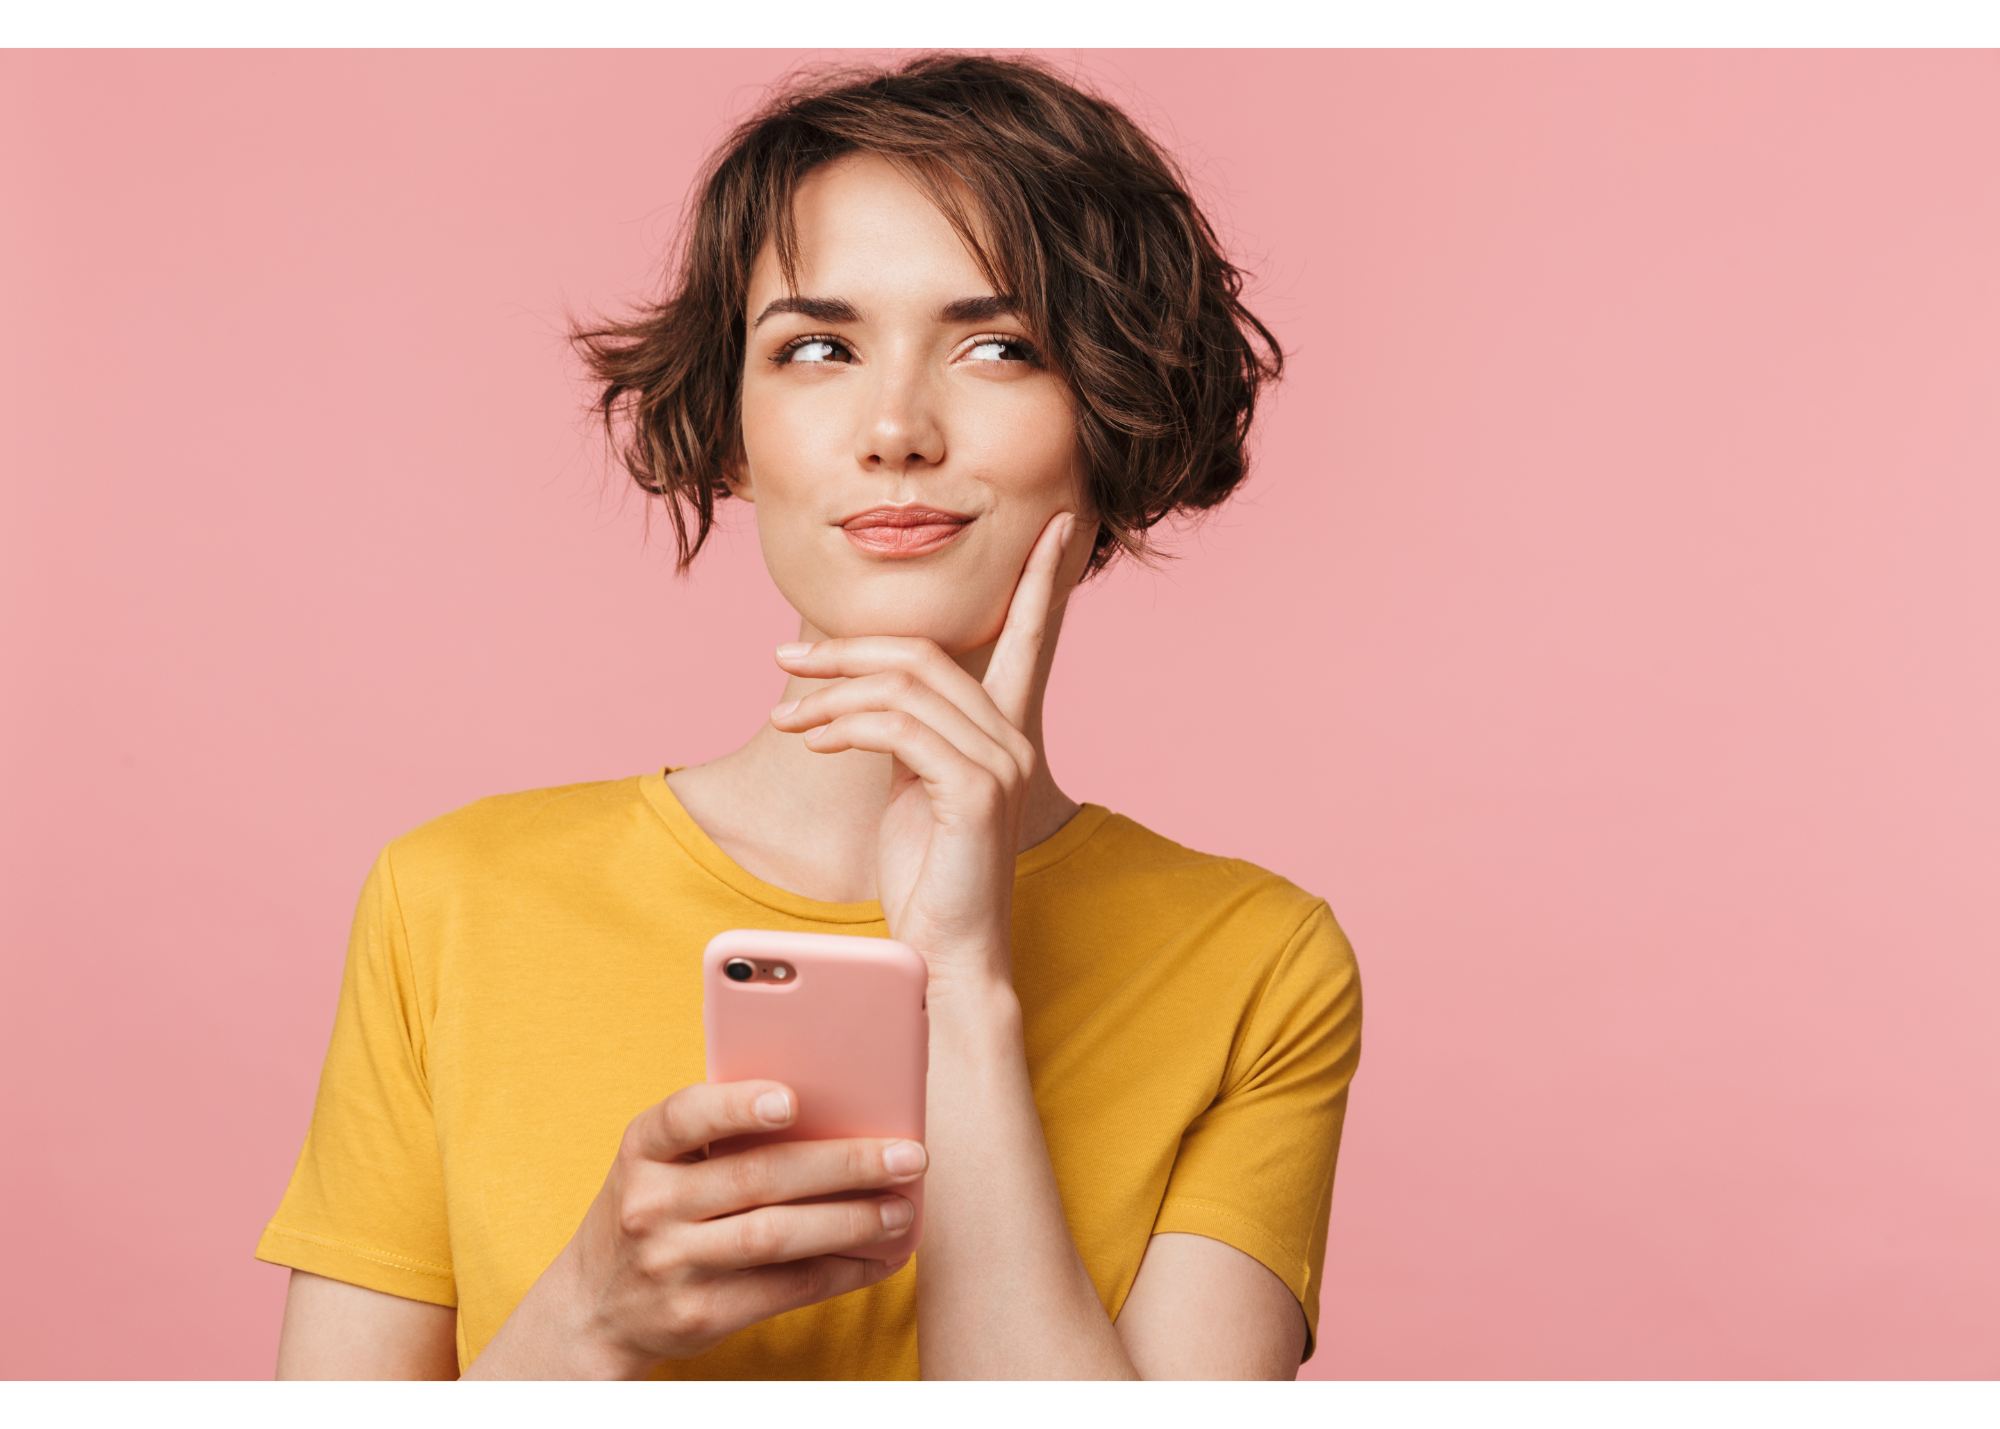 A woman holds her phone while looking away with a pensive look. This could symbolize the improving flexible thinking skills cultivated by working with a New Bern therapist. Learn more about therapy for anxiety in New Bern, NC and the support it can offer.